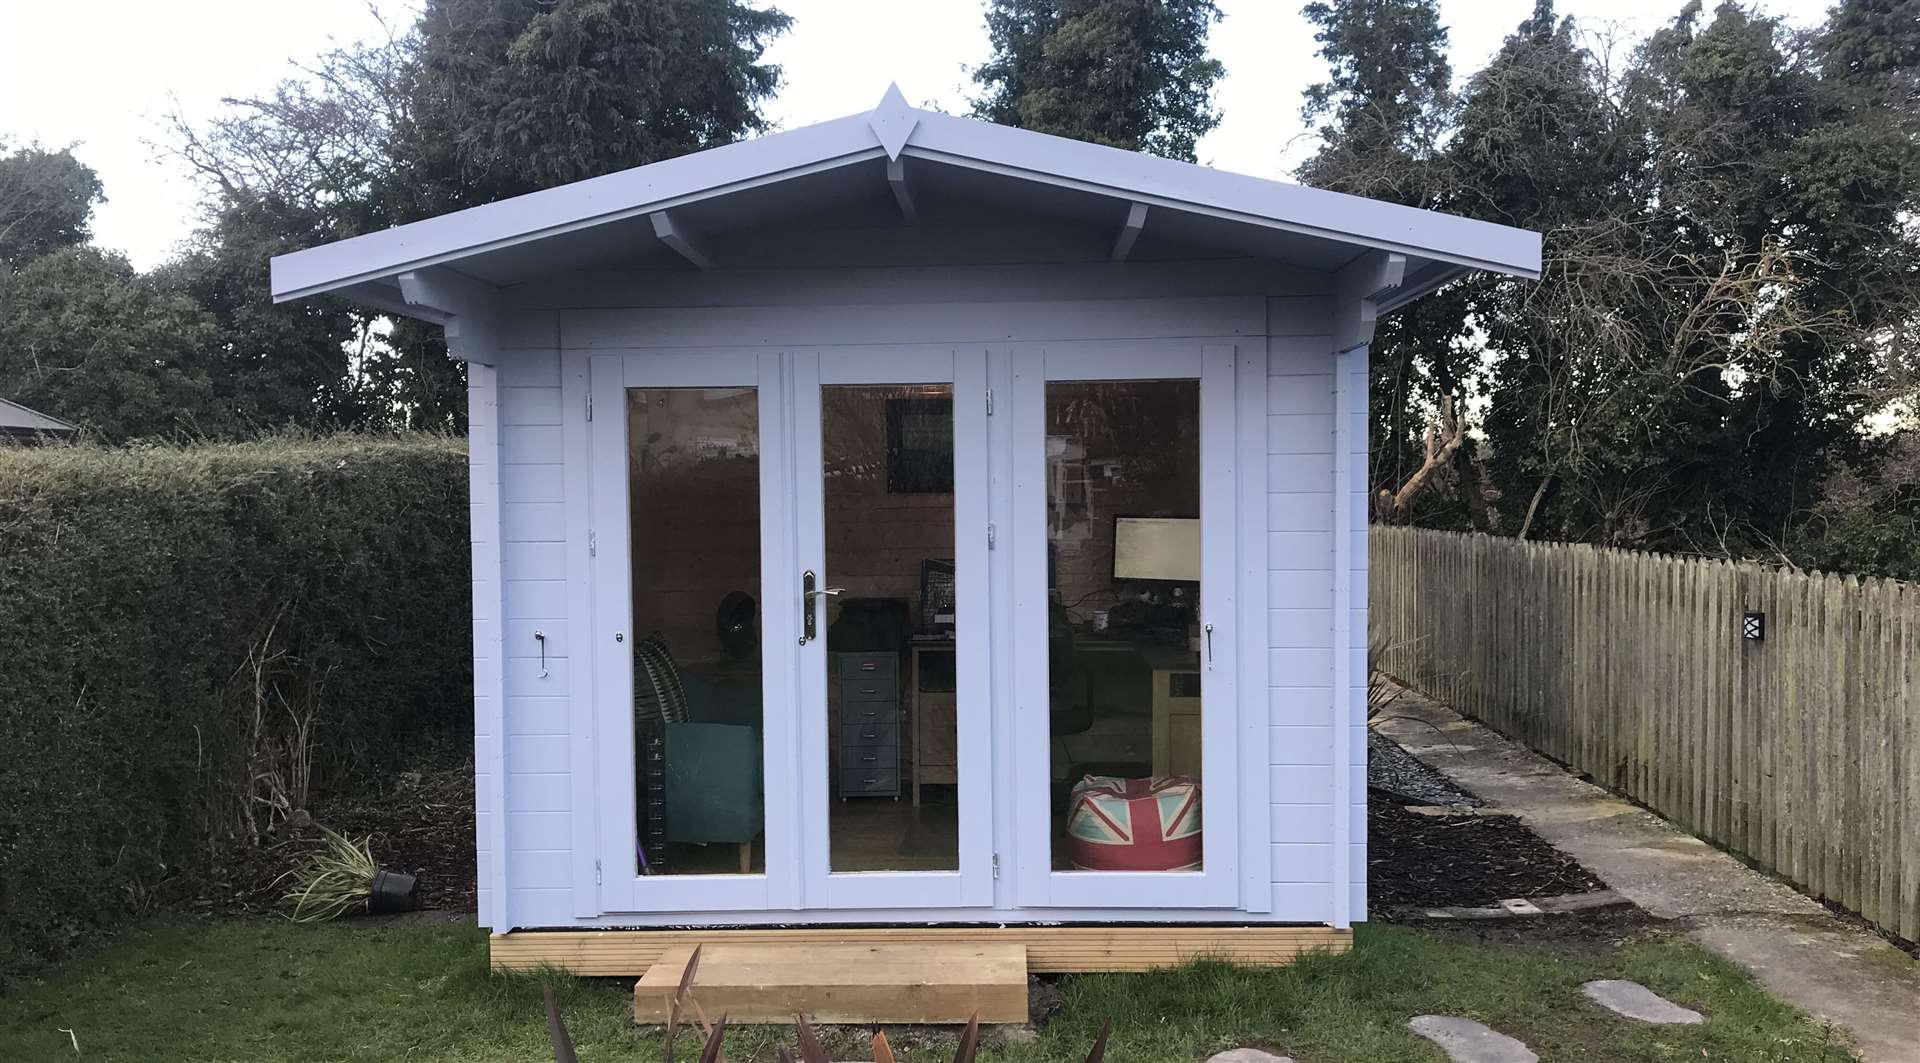 Karen and her husband have matching garden offices